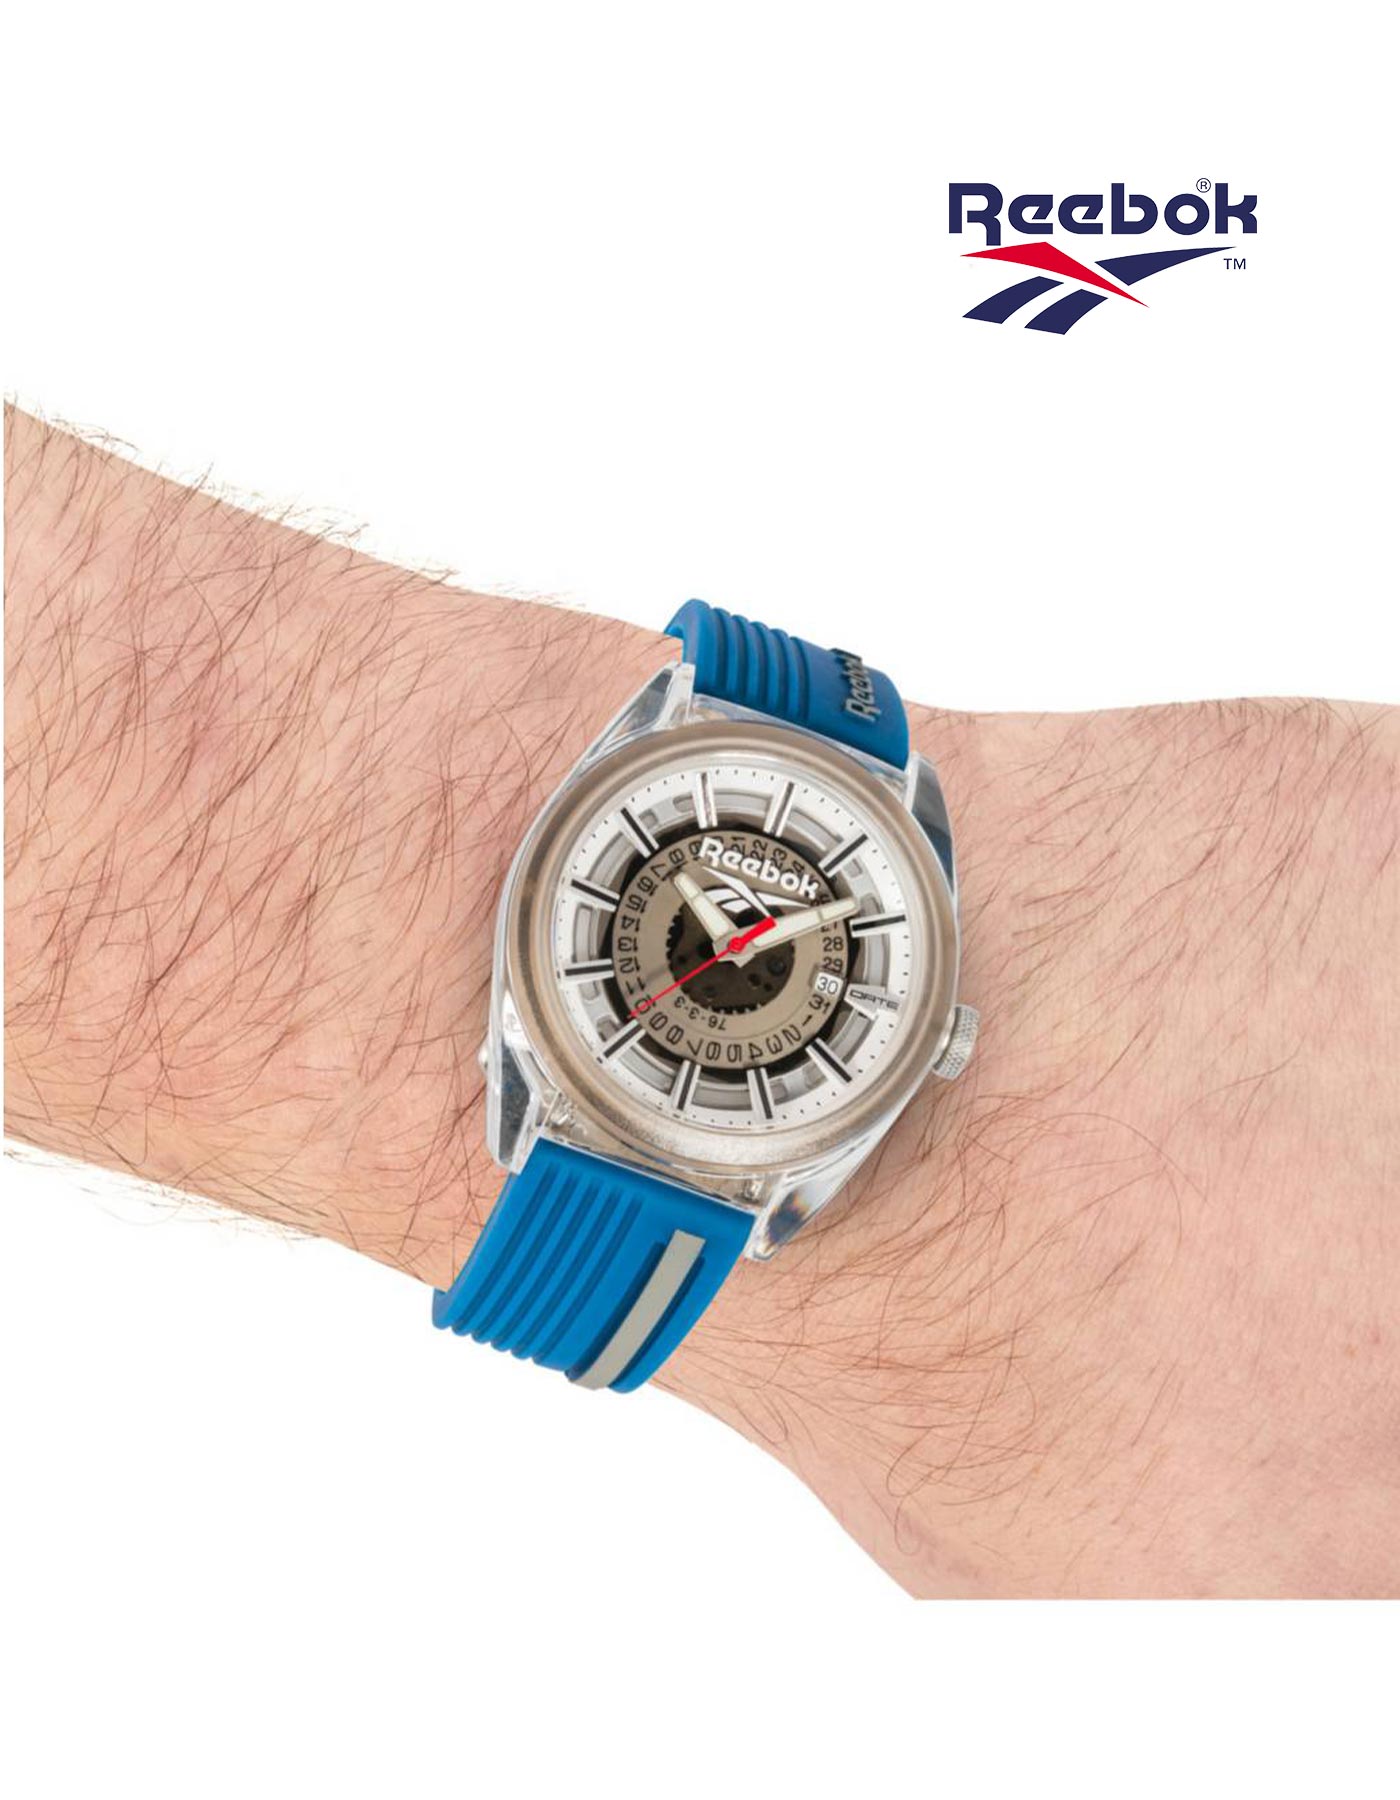 Buy Reebok Walker Analog Clear Dial Men's Watch-RV-WAL-G3-PAIW-ZN at  Amazon.in